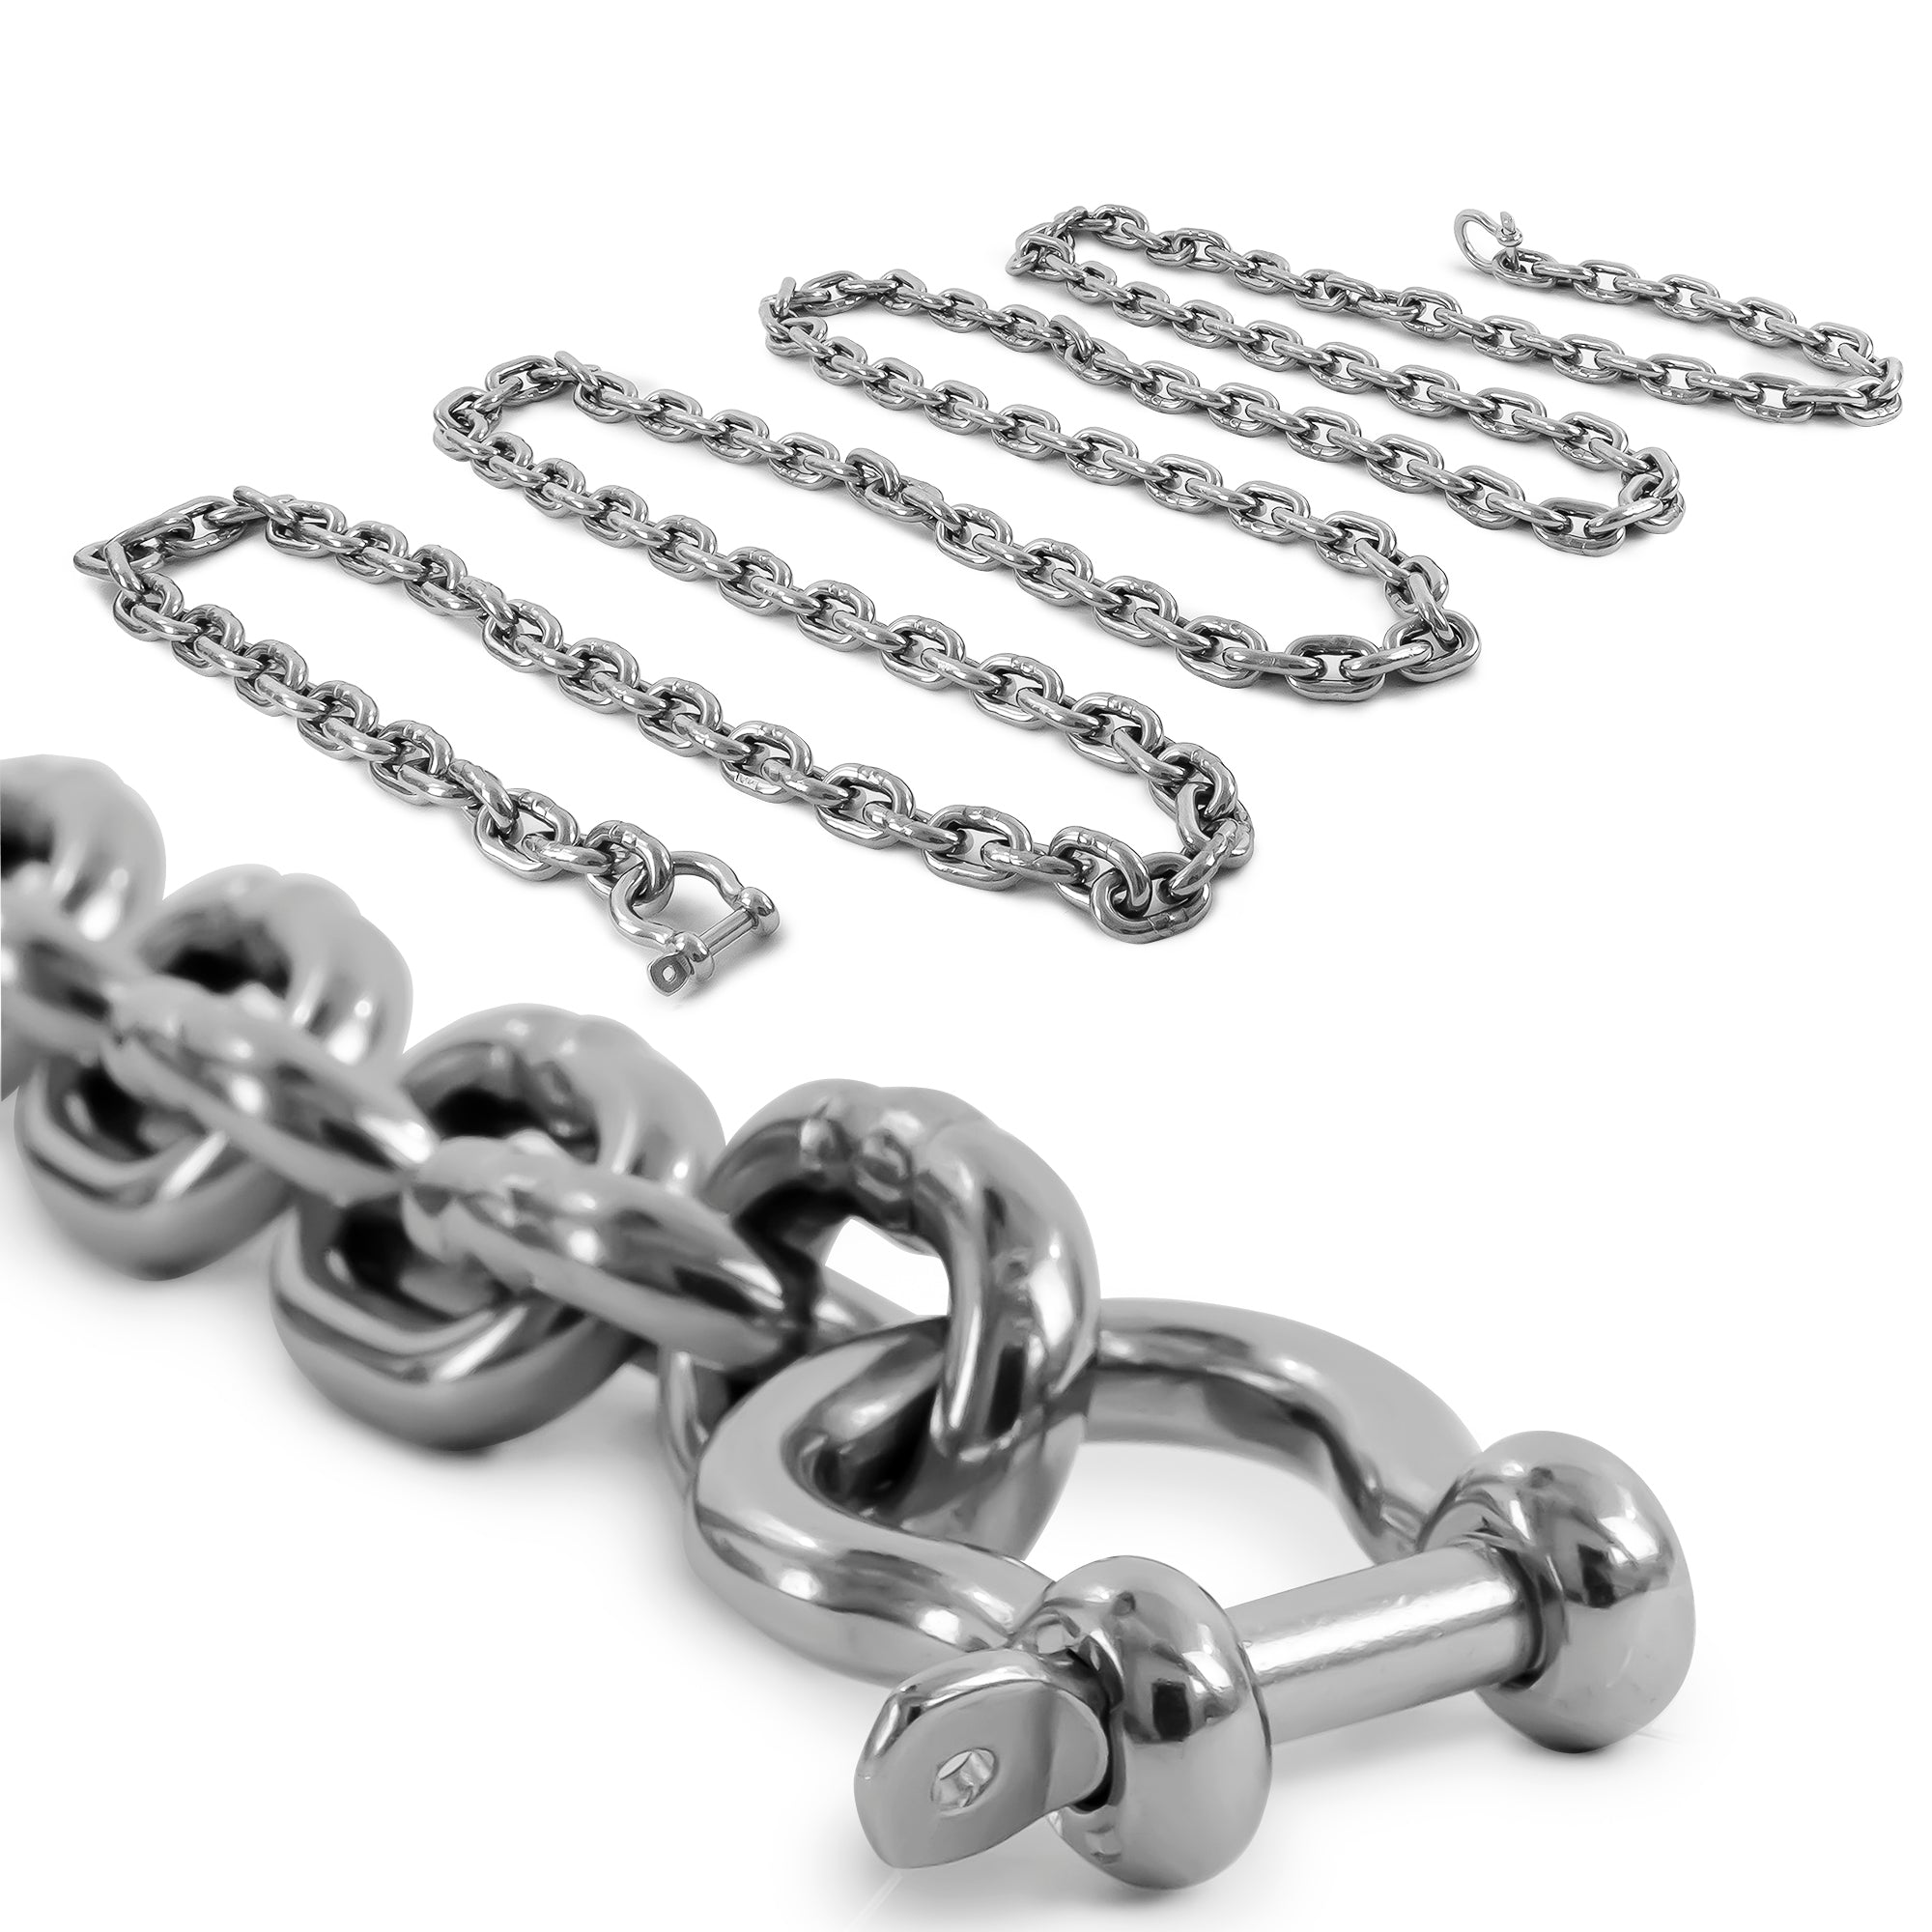 Boat Anchor Lead Chain with Shackles, 5/16" x 15', HTG4 Stainless Steel - FO4493-S15